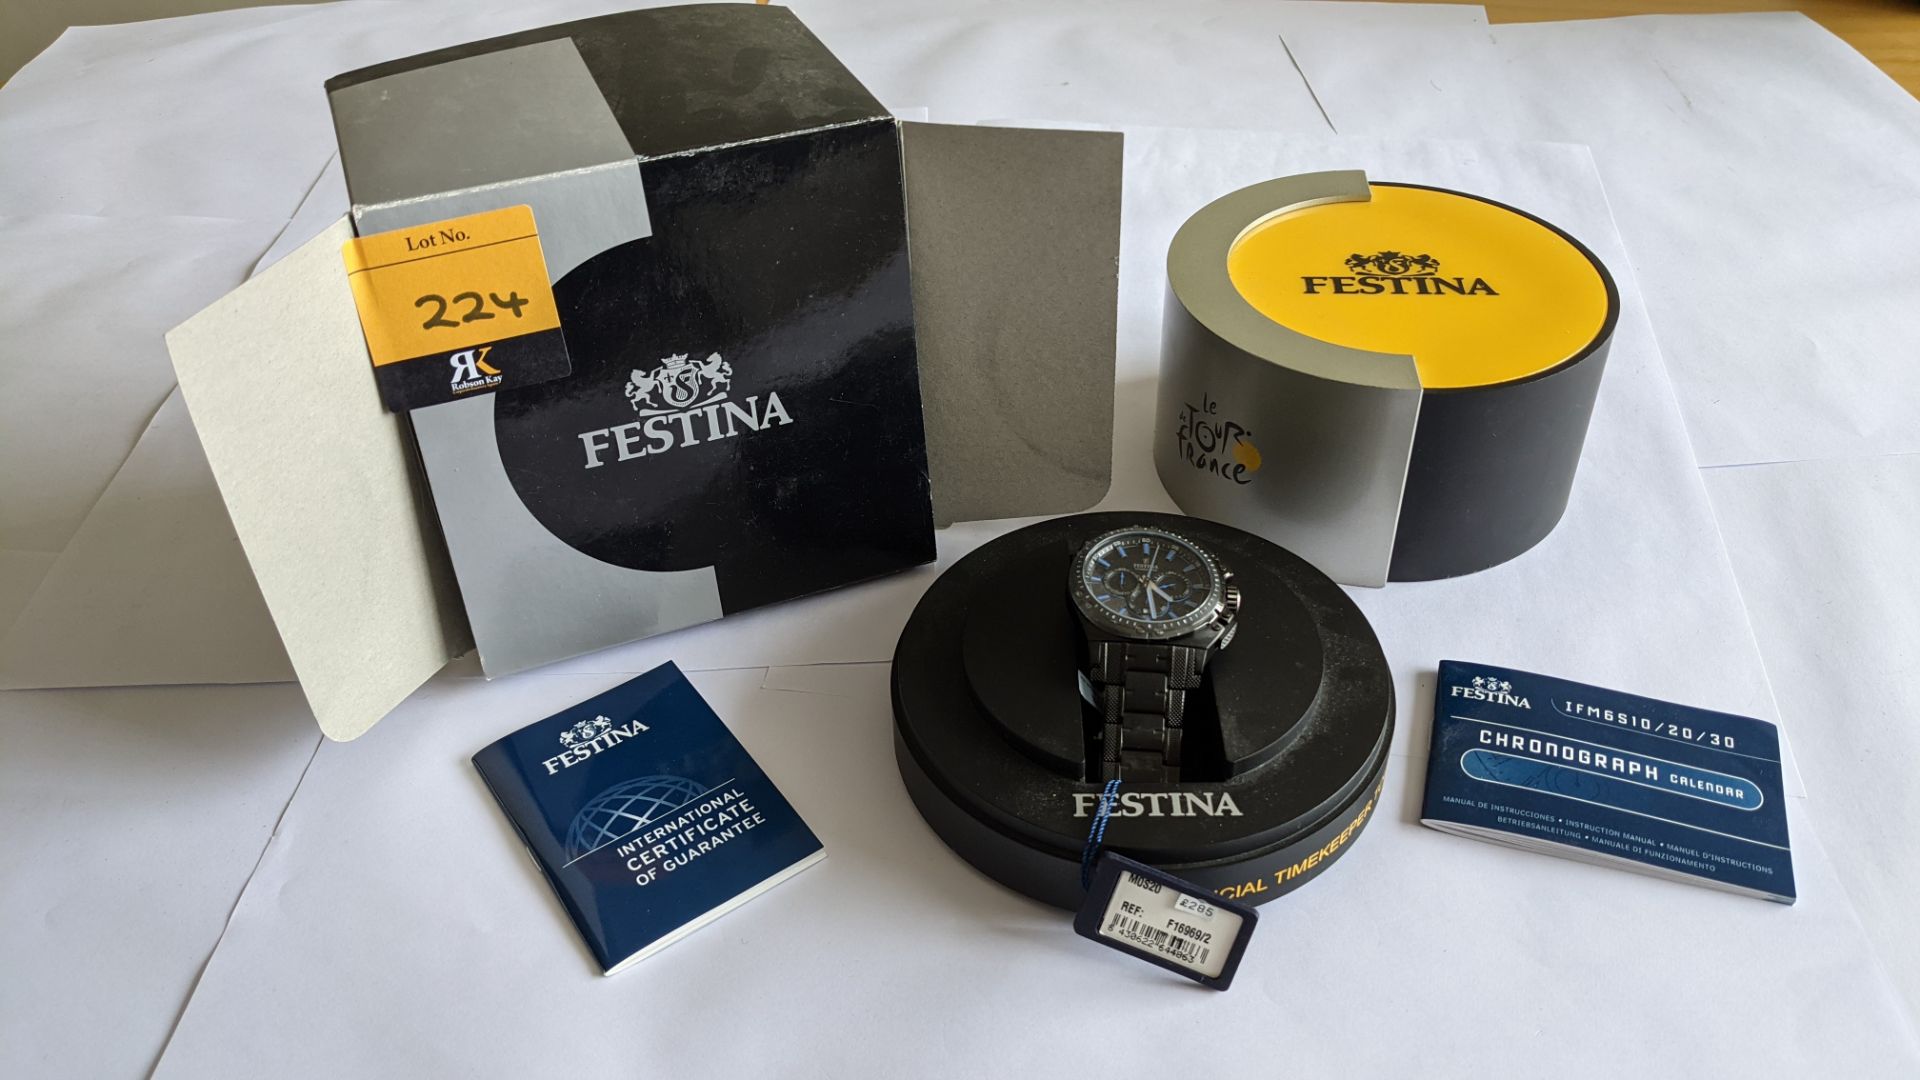 Festina stainless steel watch, reference F16969/2, 10 ATM water resistant. Includes box & book pack.